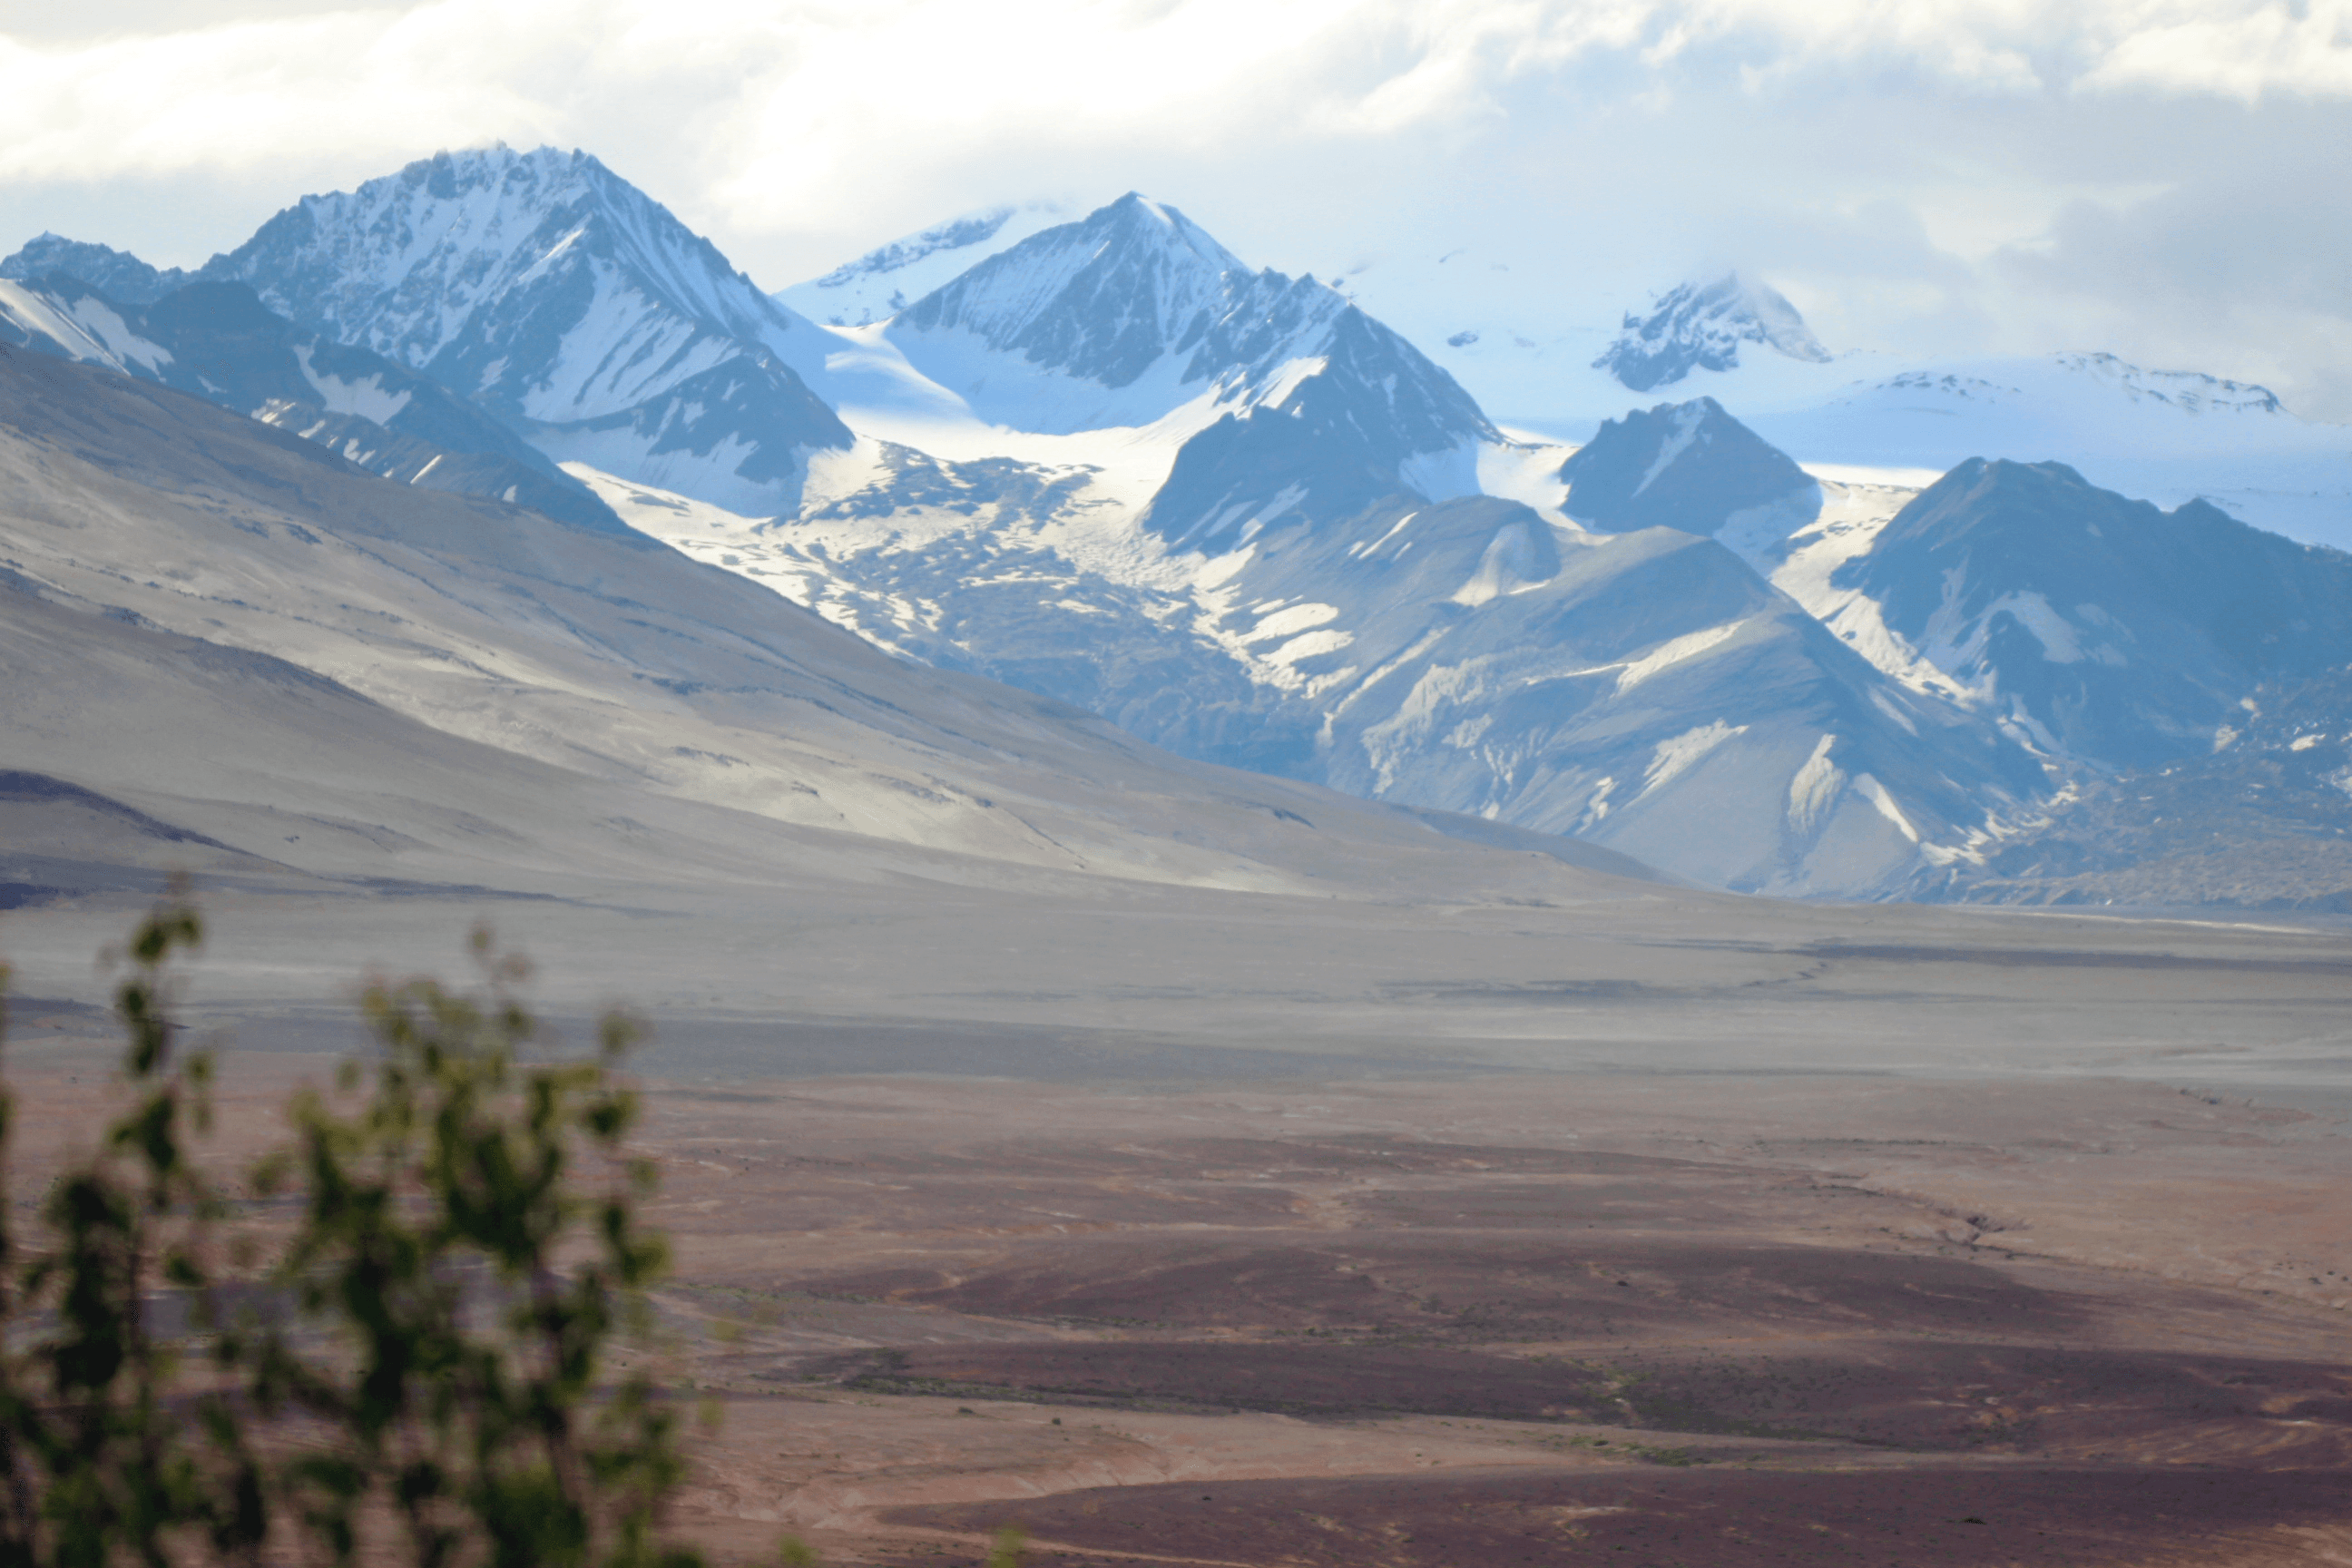  A barren, ashy valley surrounded by snow-capped mountains